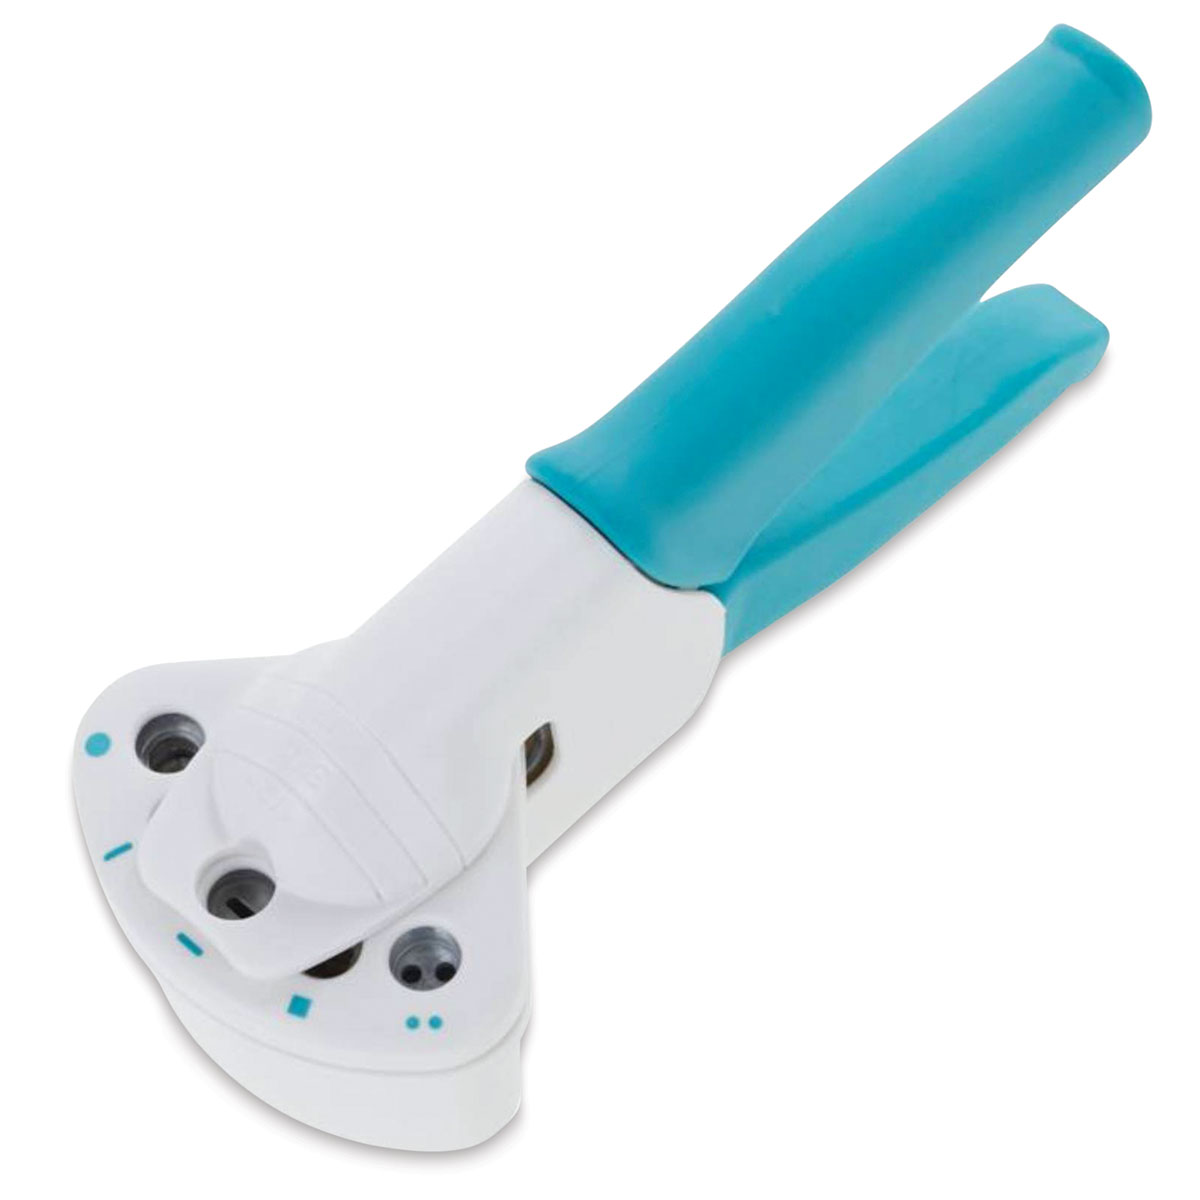 We R Memory Keepers Crop-A-Dile Multi-Hole Punches